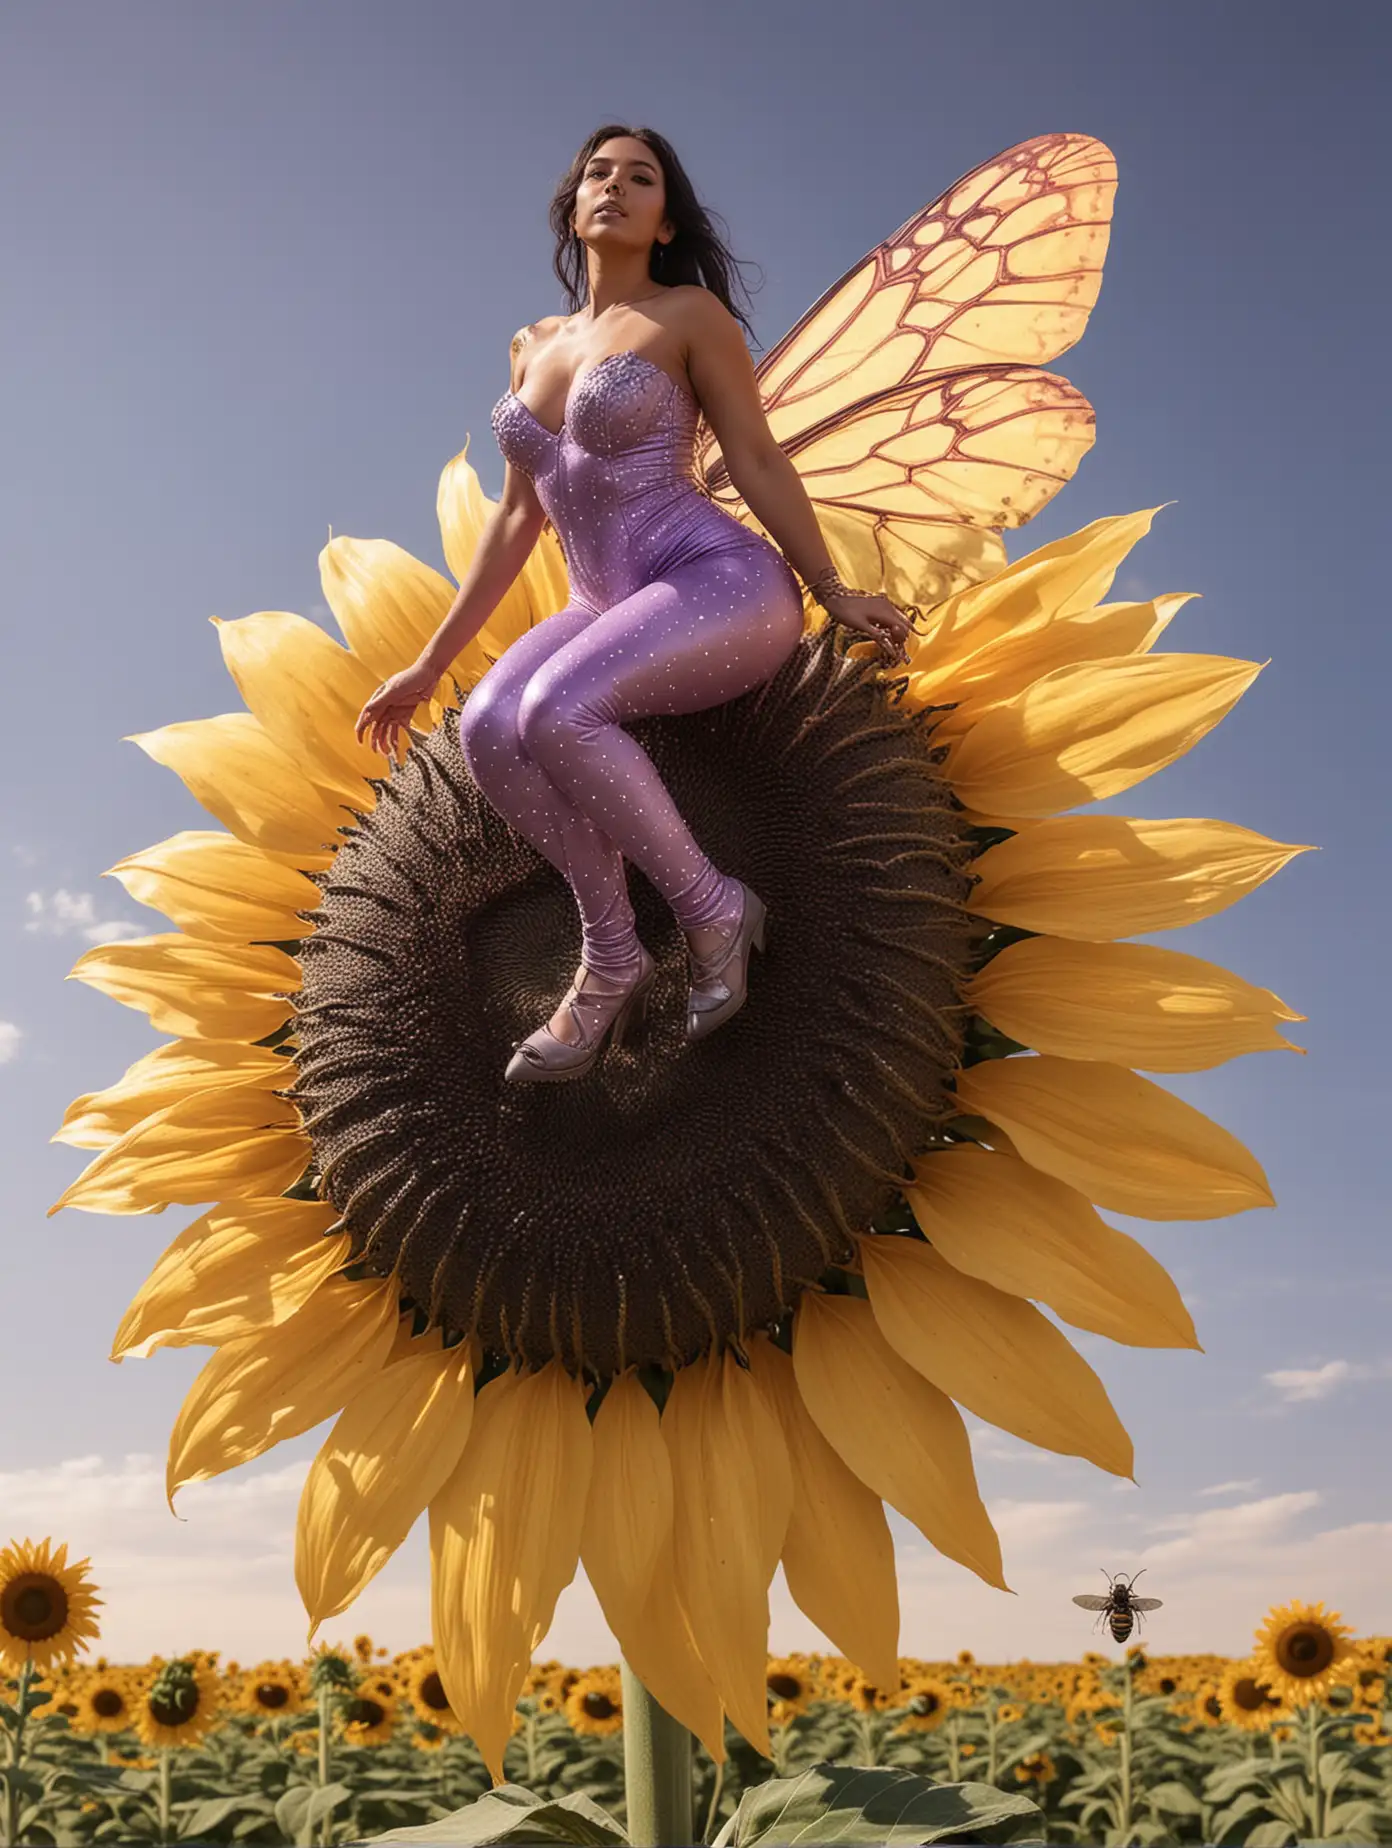 Full body. Latina woman, body painted in light purple, riding a gigantic bee, gigantic sunflower